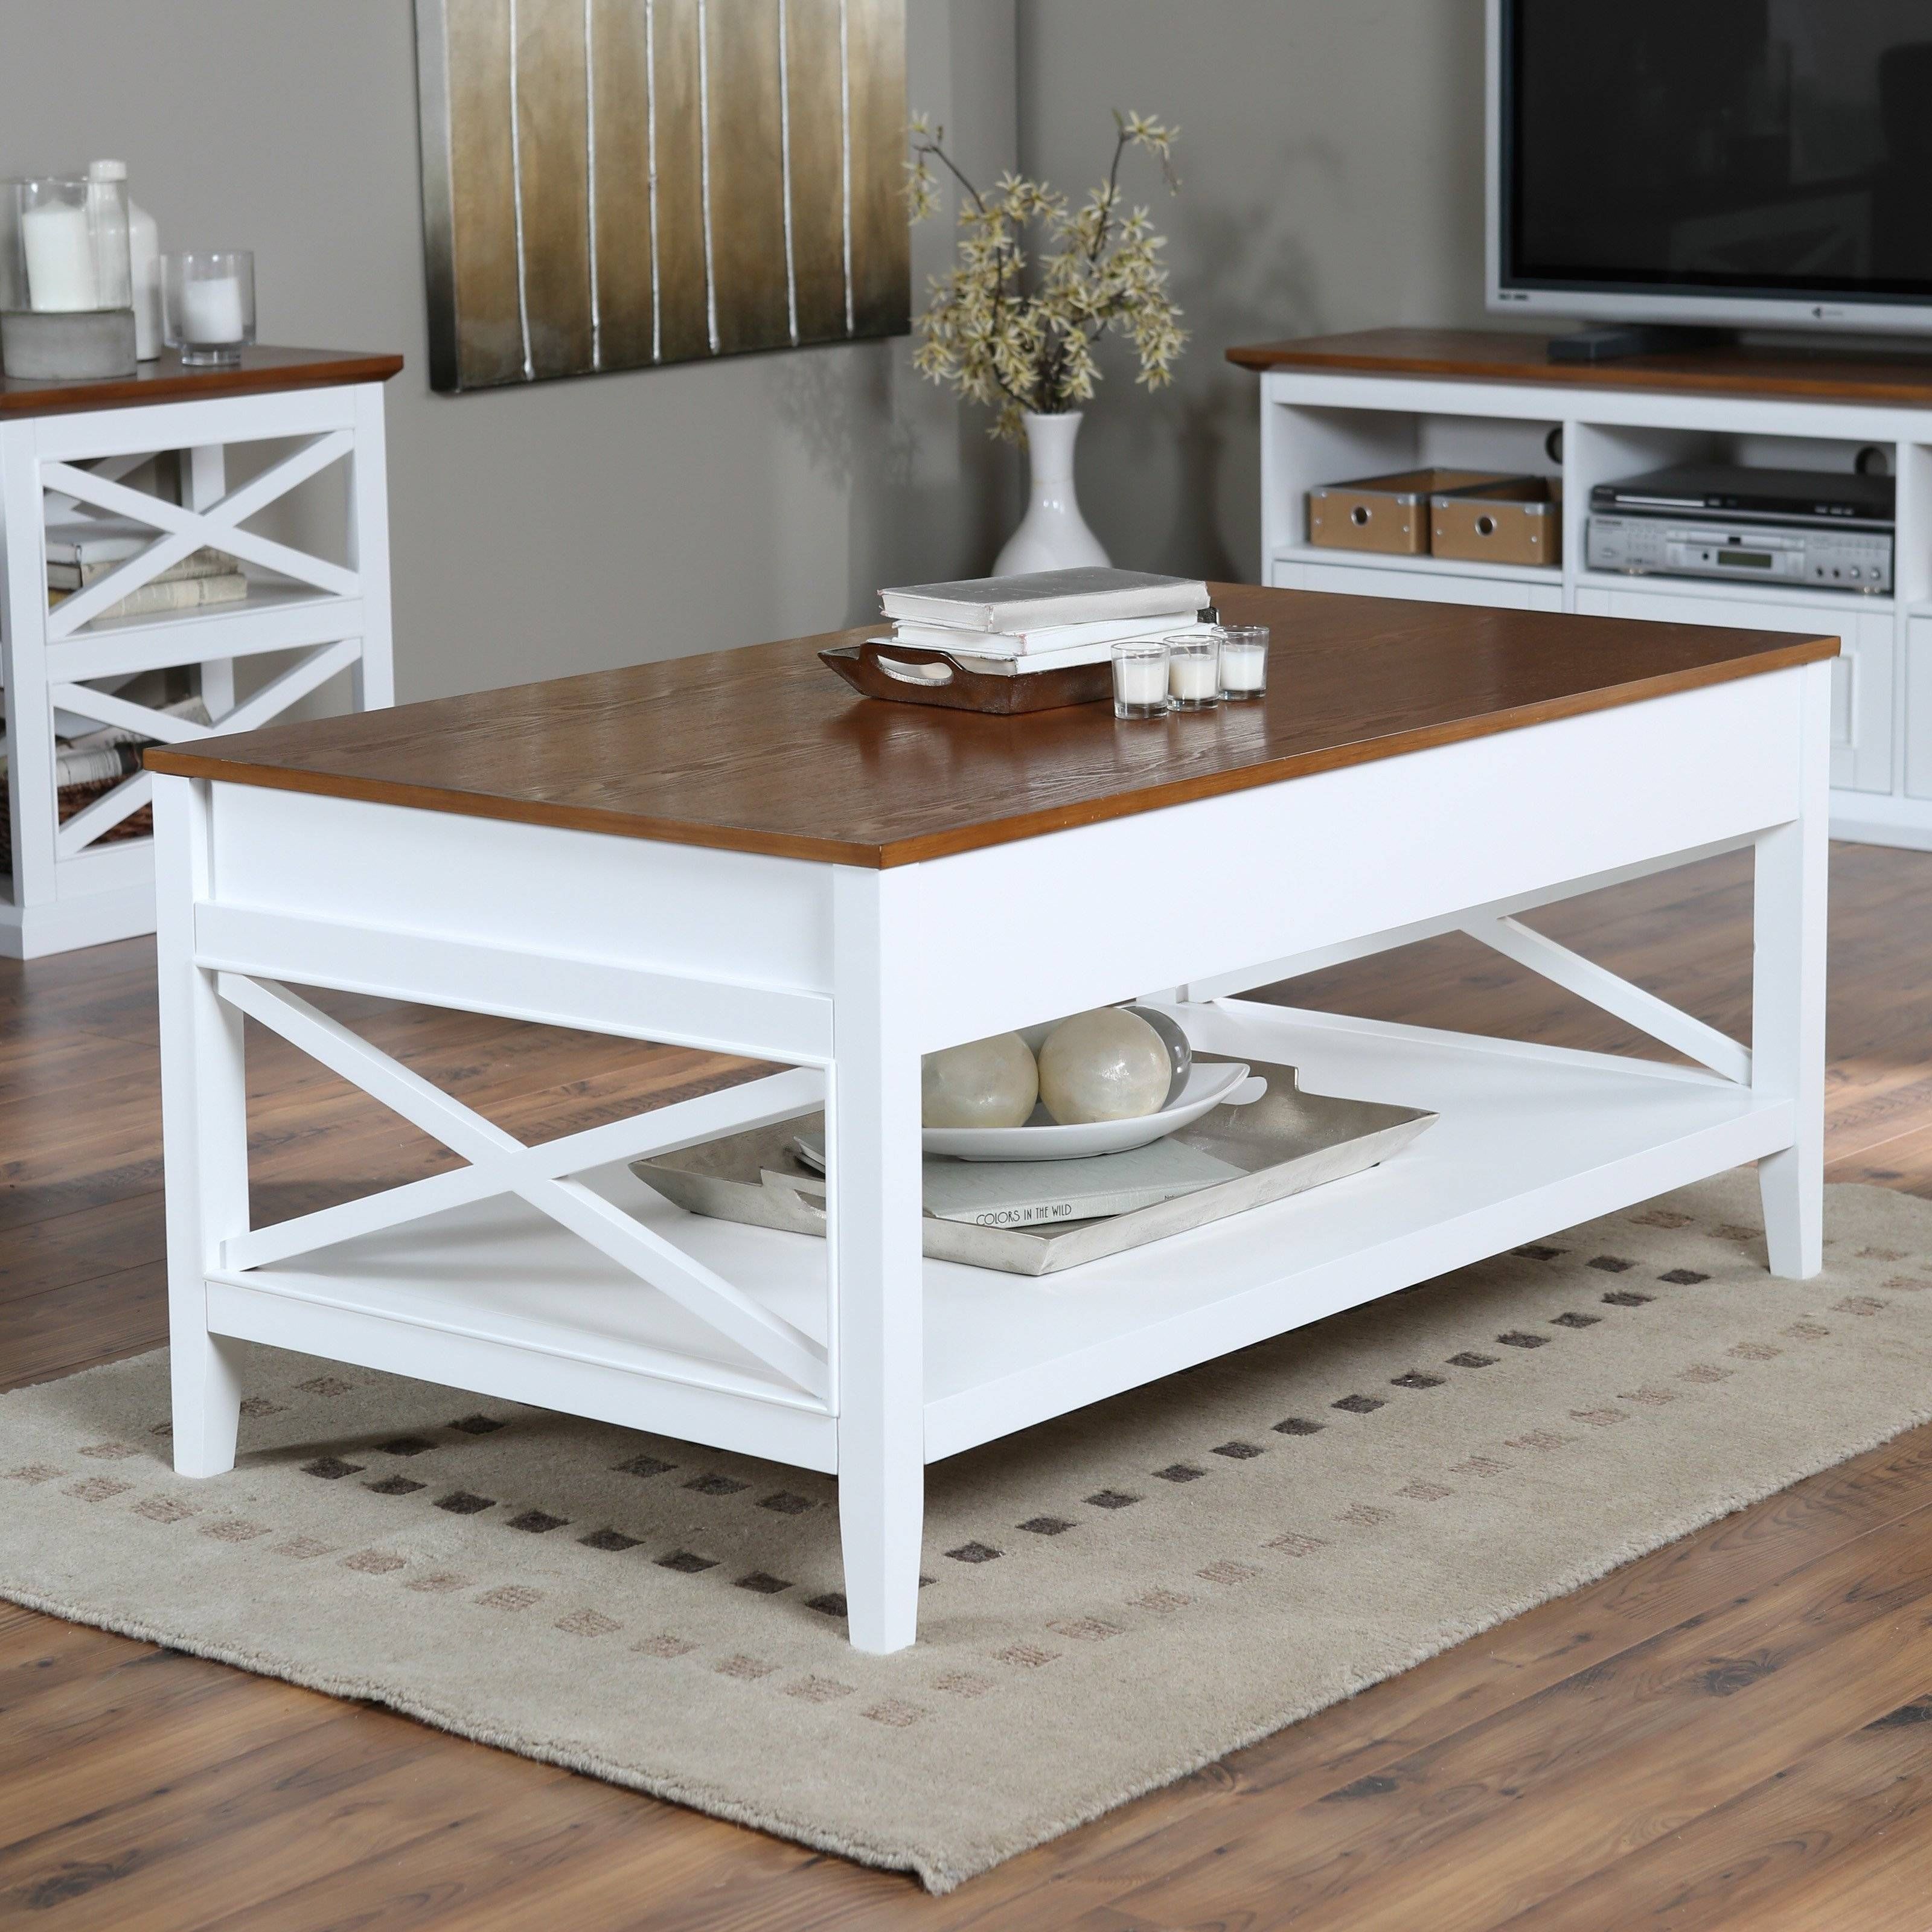 Belham Living Hampton Storage And Lift Top Coffee Table | Hayneedle With Regard To Oak And Cream Coffee Tables (View 5 of 30)